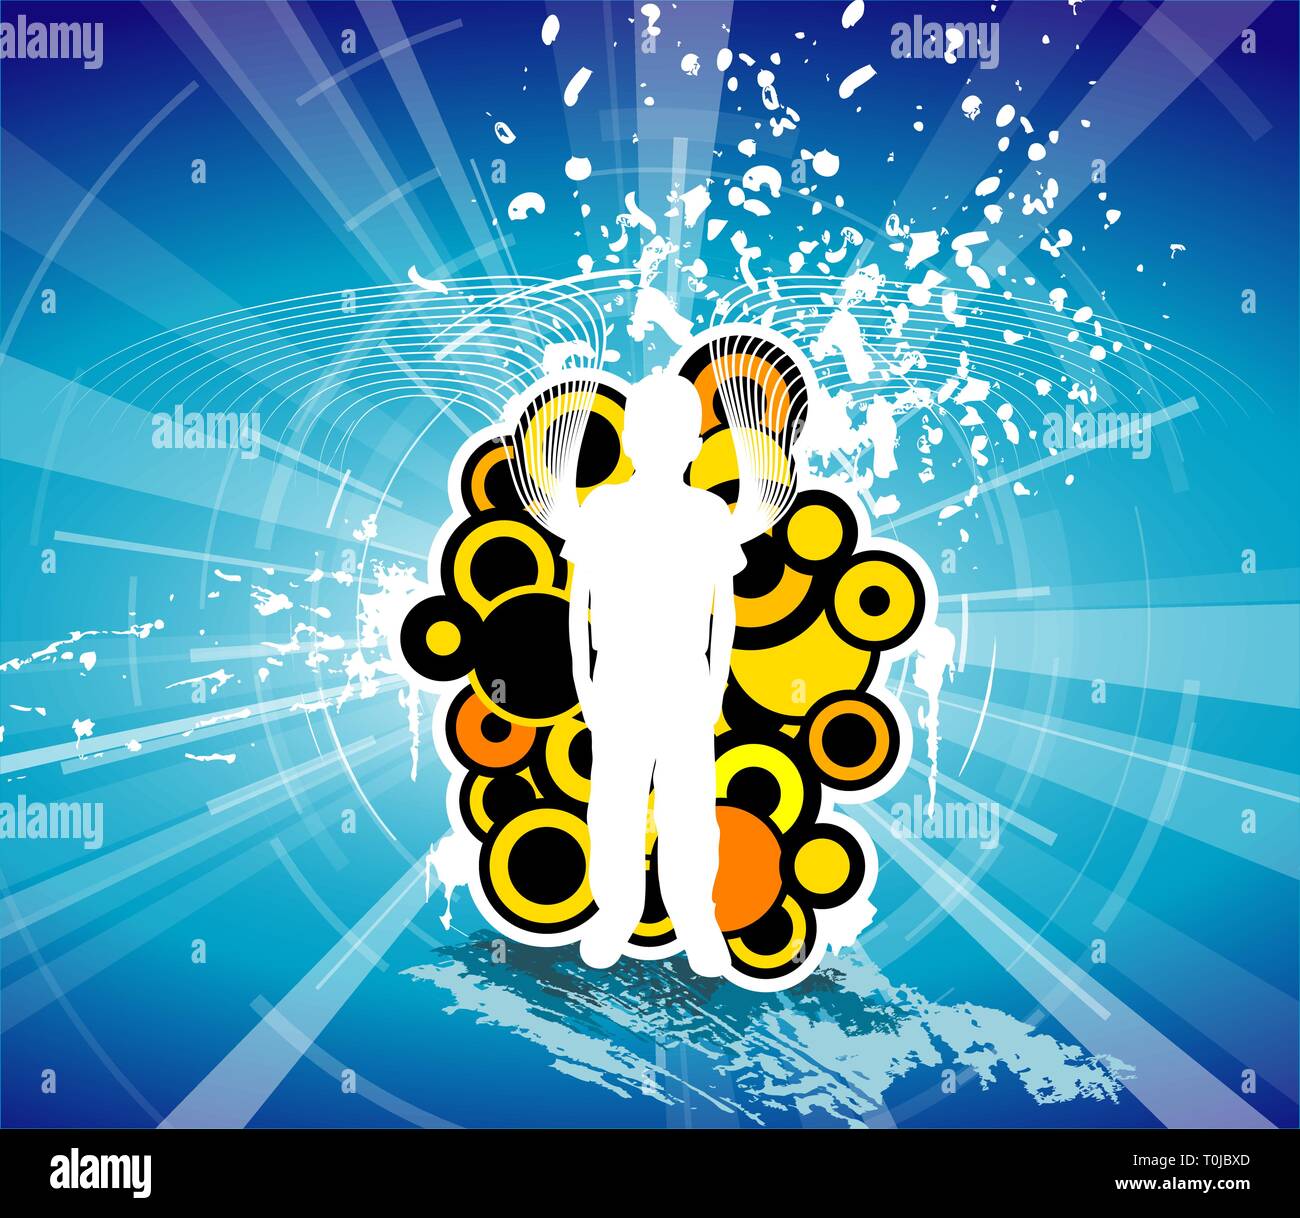 A boy from a heaven - grunge abstract illustration Stock Vector